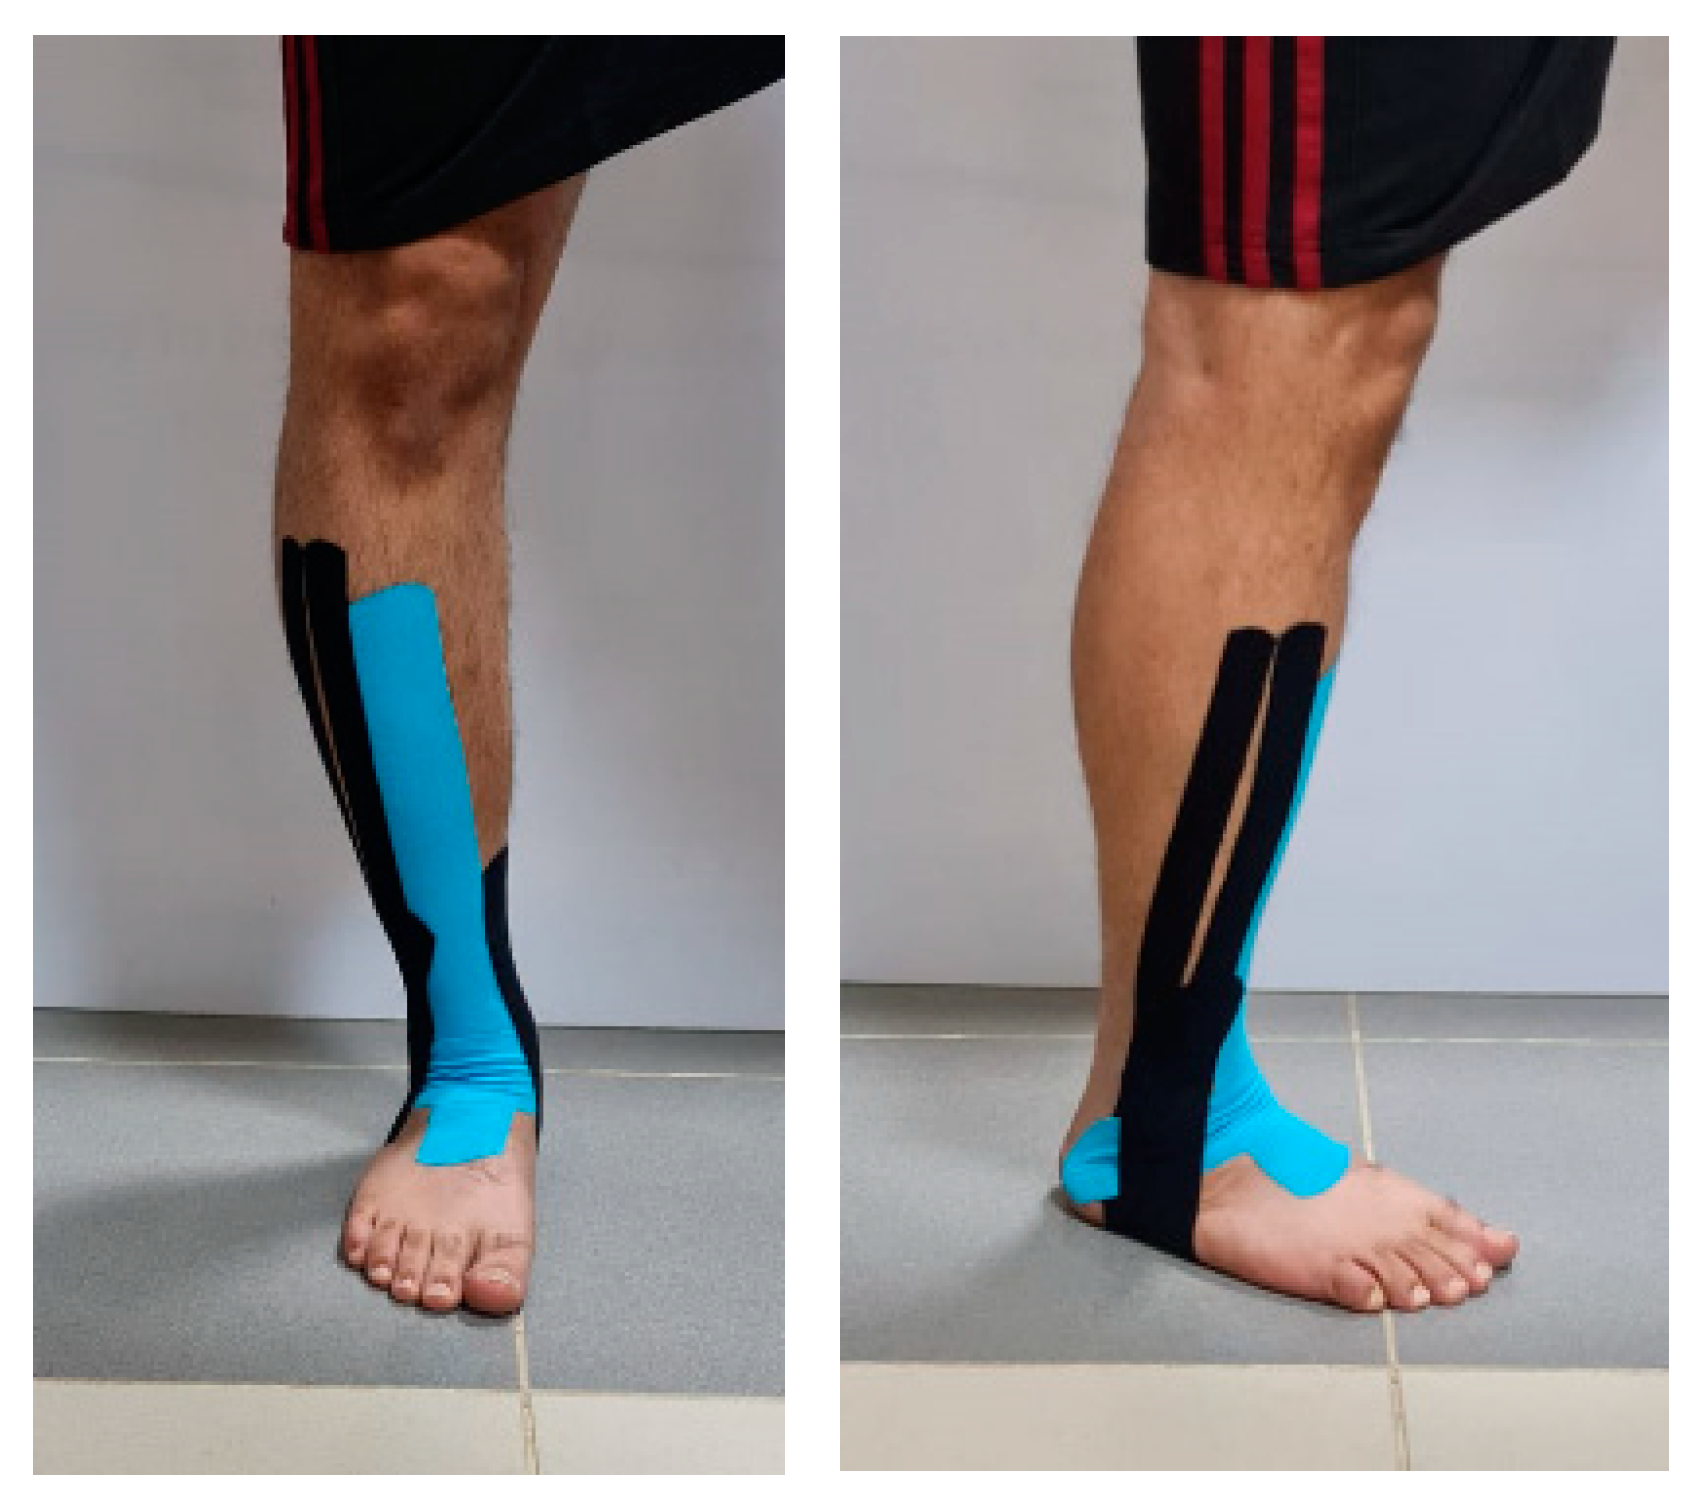 PDF) Kinesio taping for ankle sprain in youth athlete: A protocol